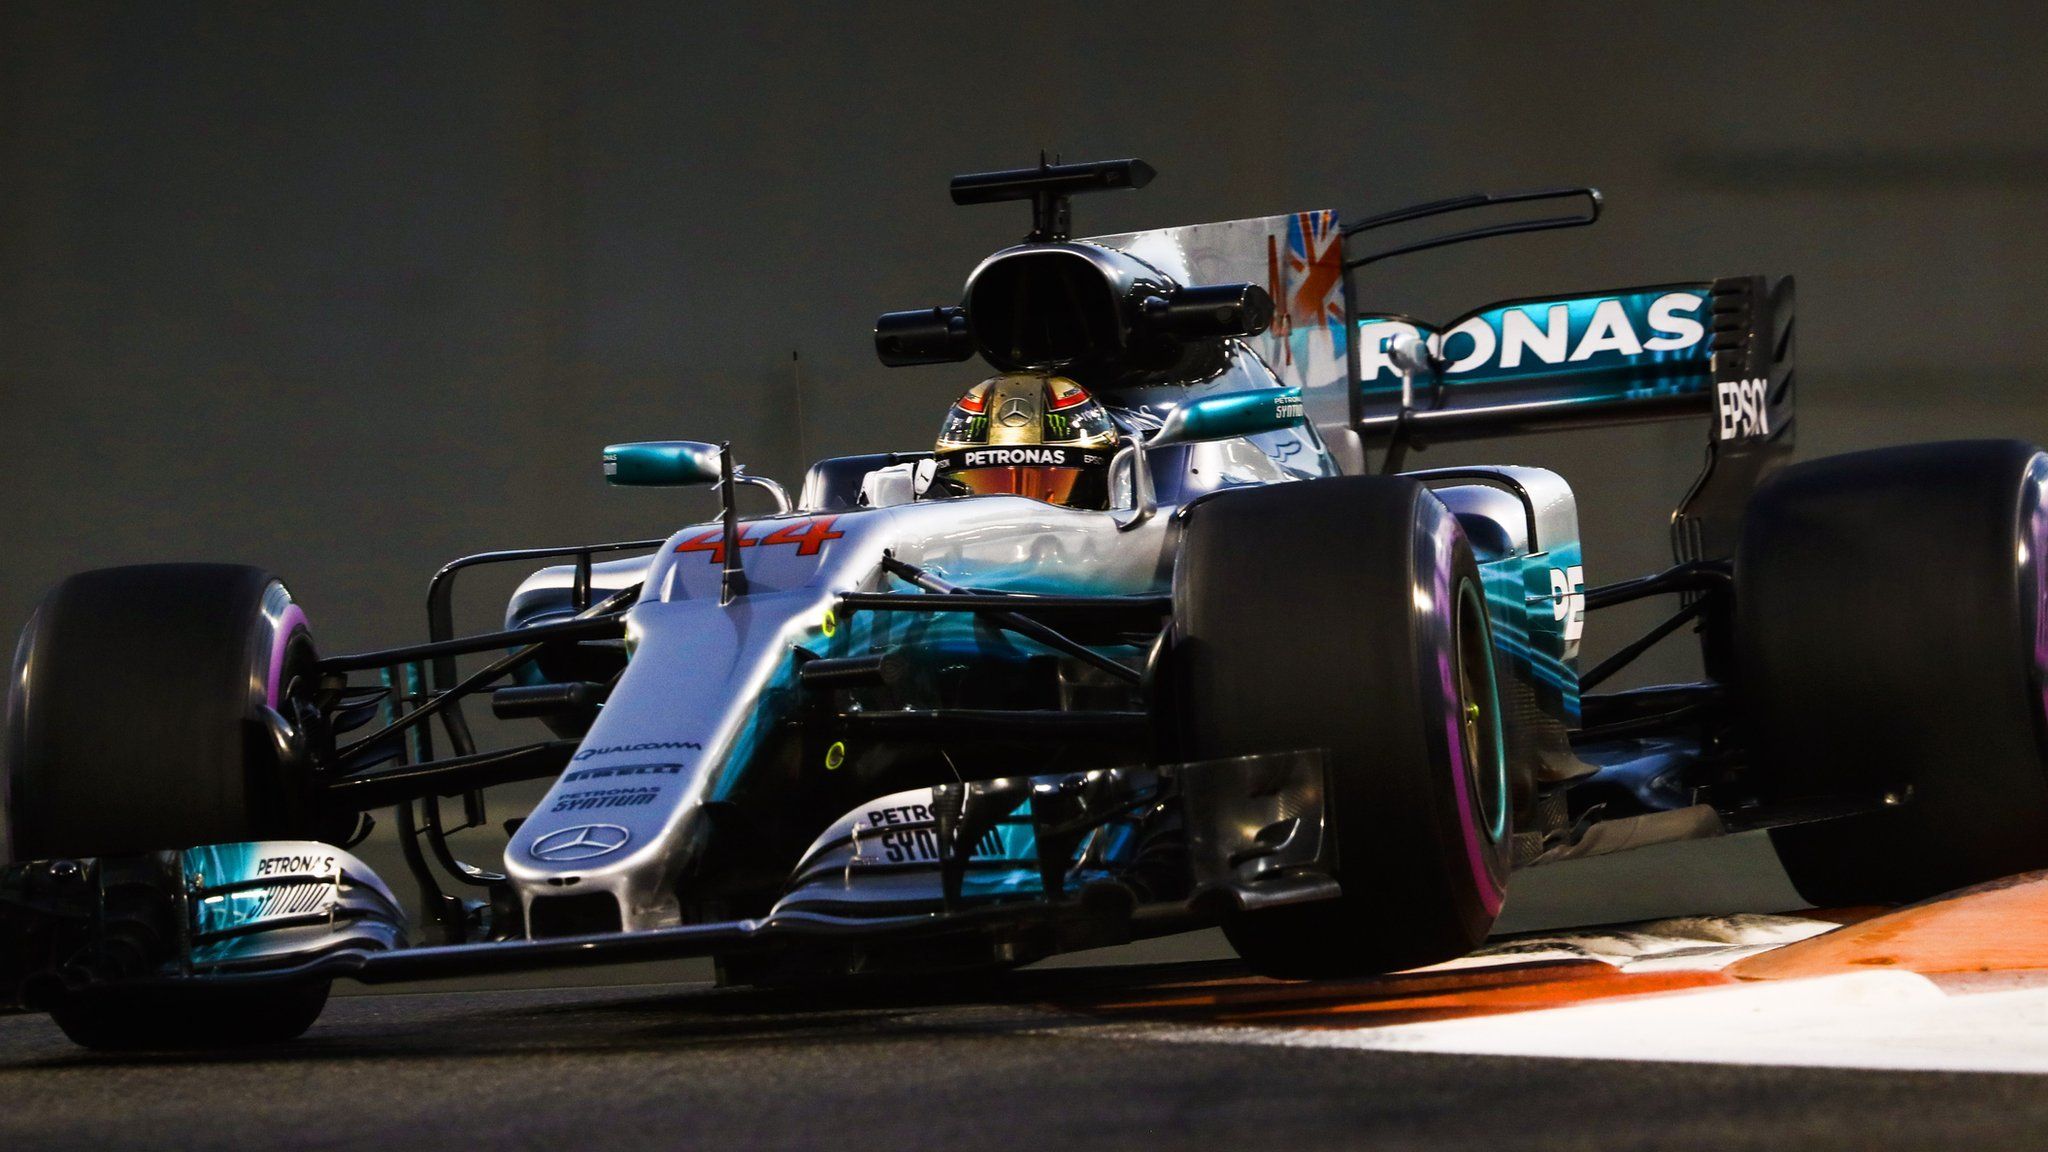 Lewis Hamilton in action at the Abu Dhabi Grand Prix